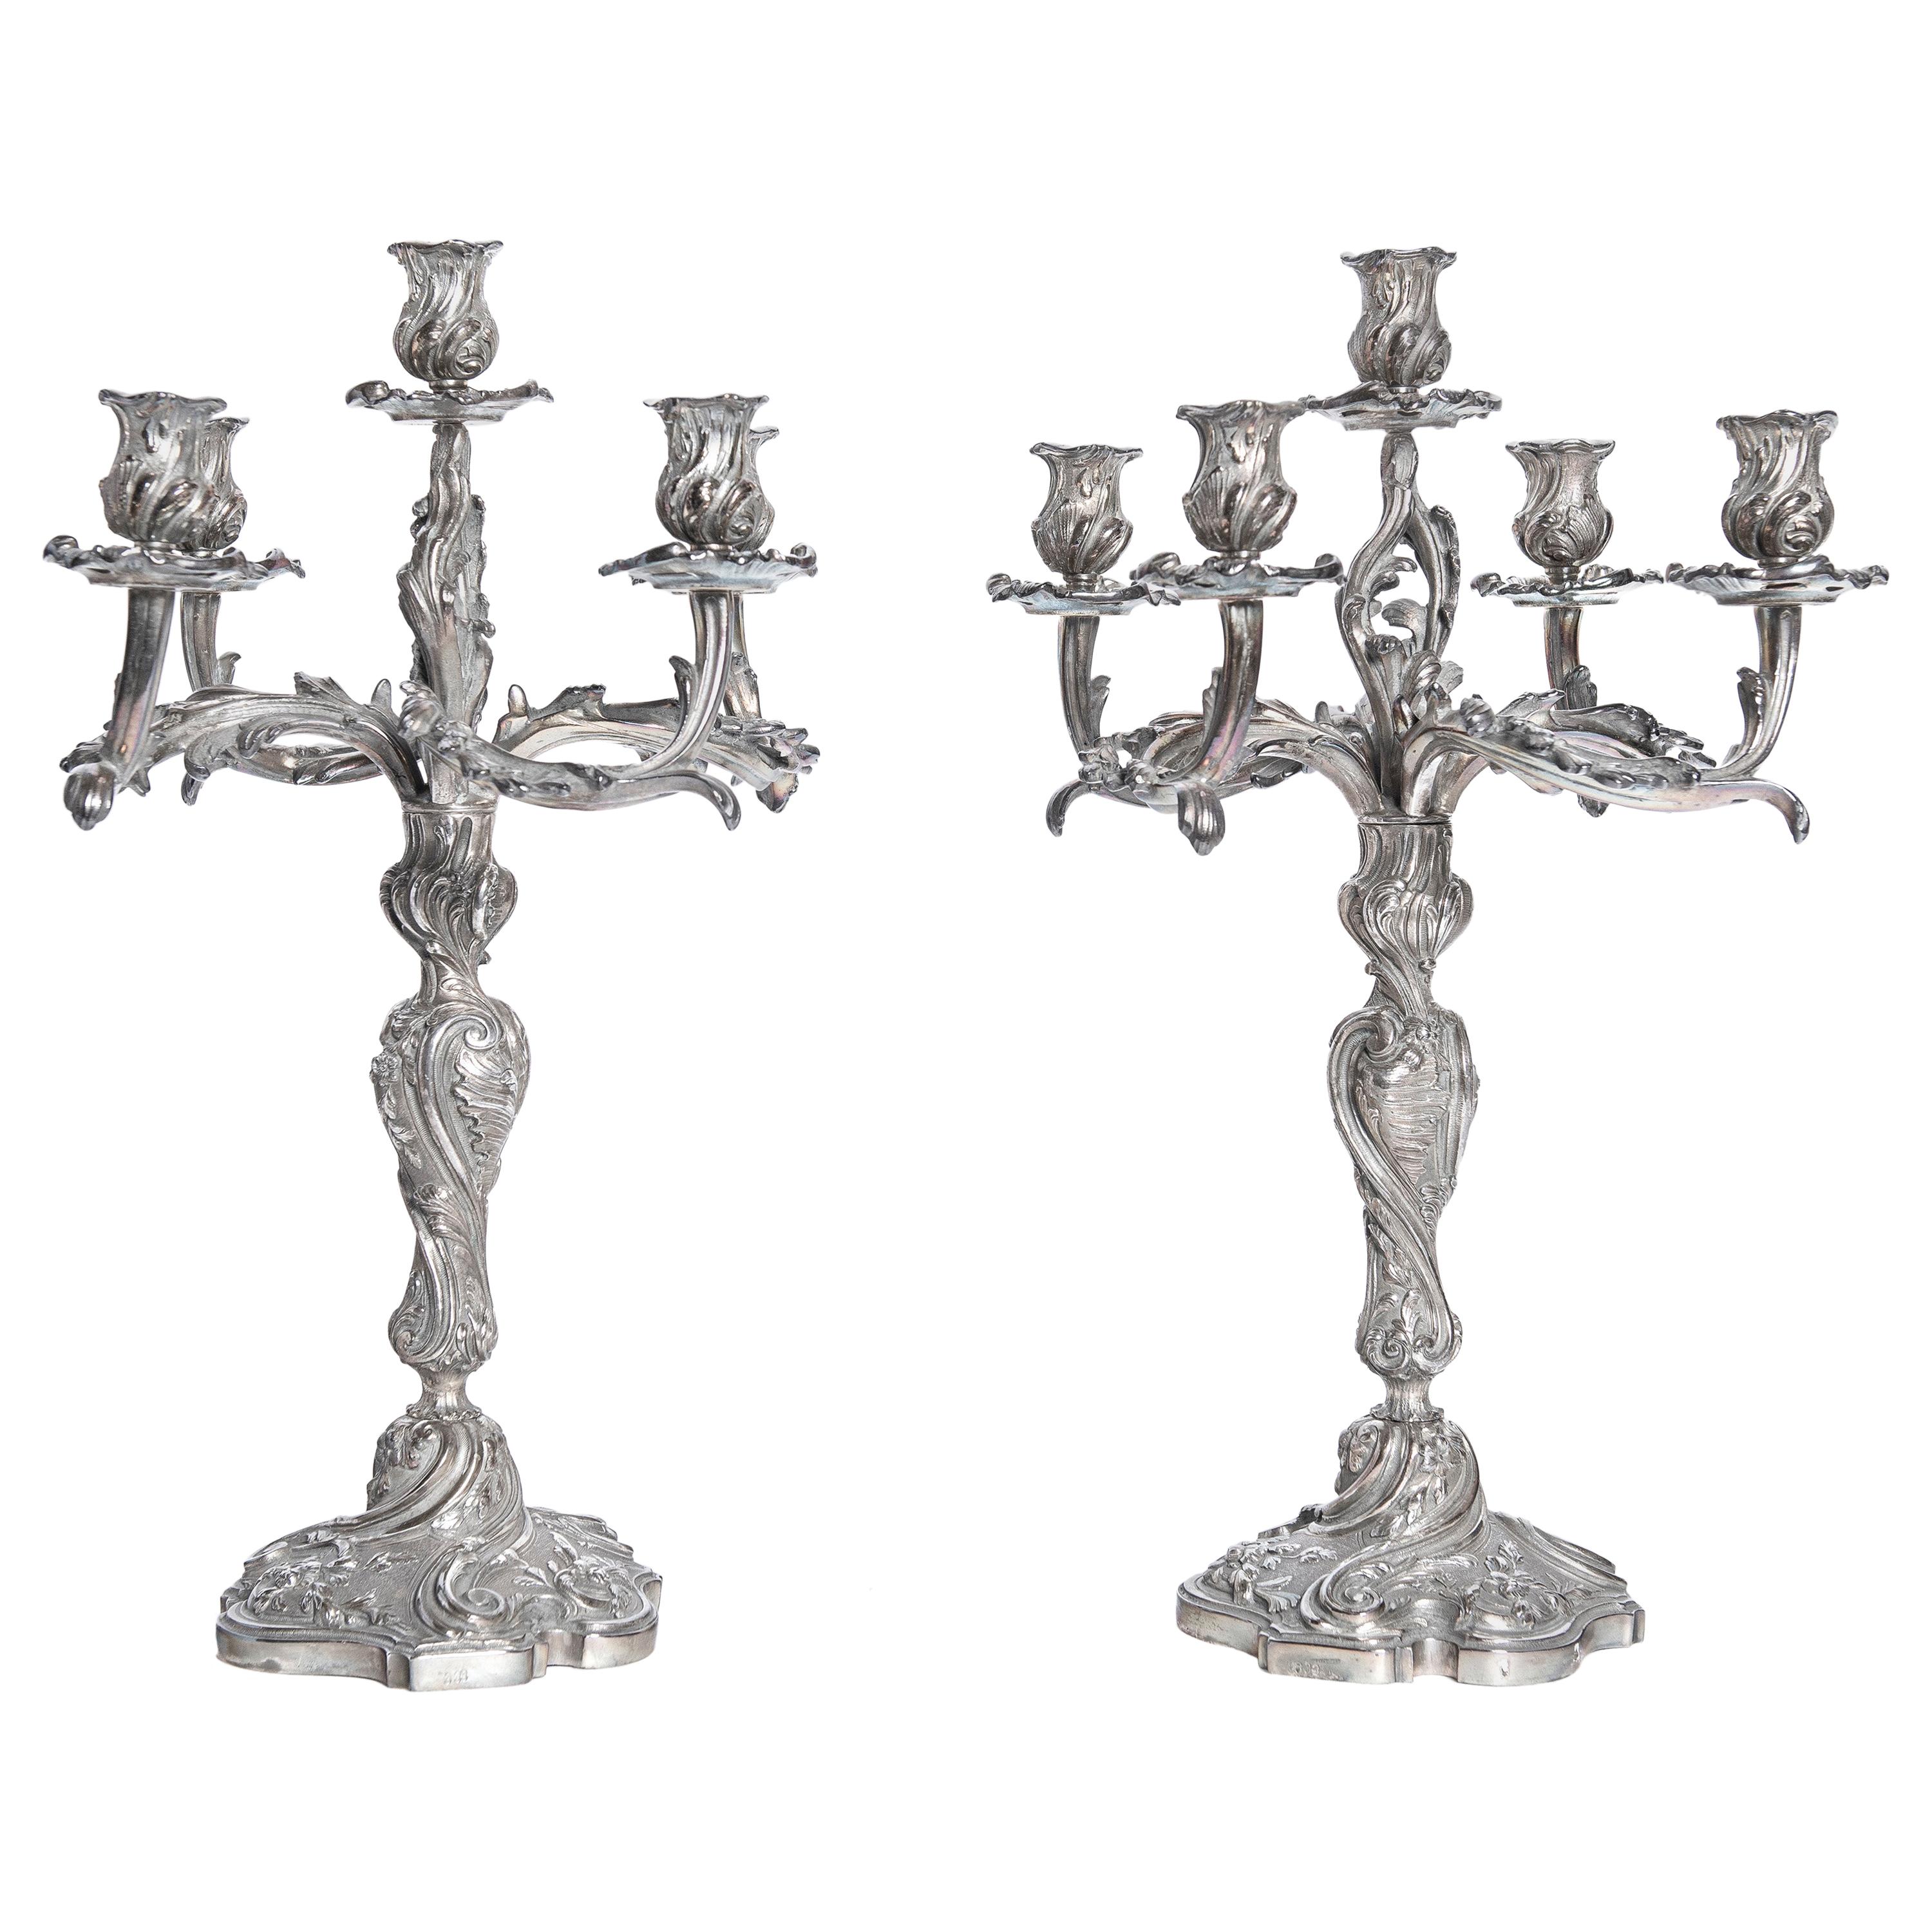 Pair of Silver Plate Candelabras Signed Christofle, France, Early 20th Century